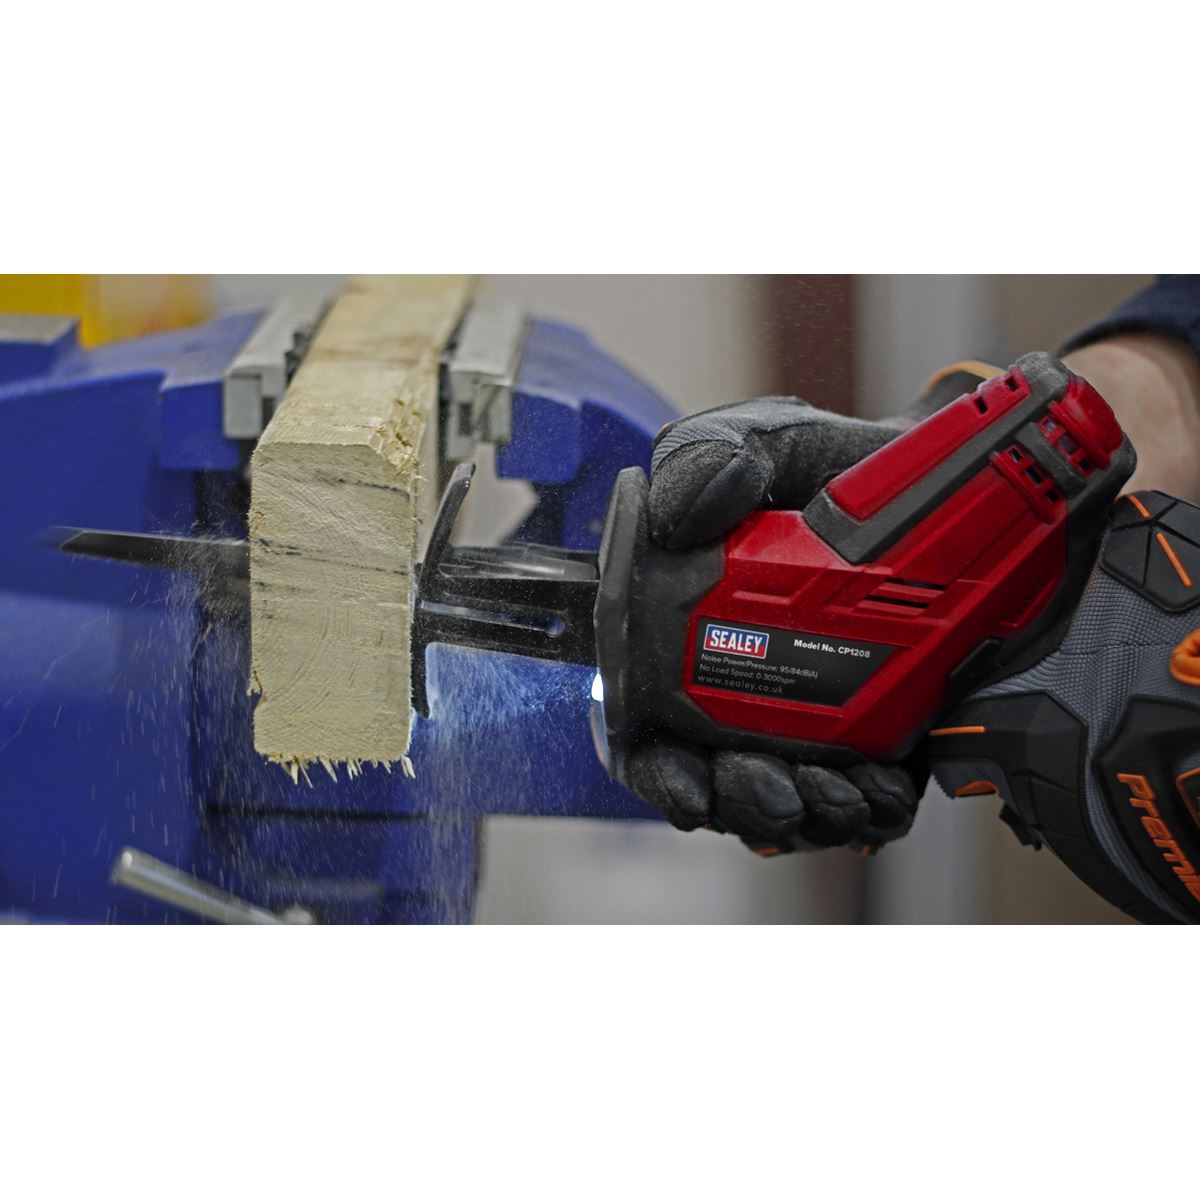 Sealey Cordless Reciprocating Saw 12V SV12 Series - Body Only